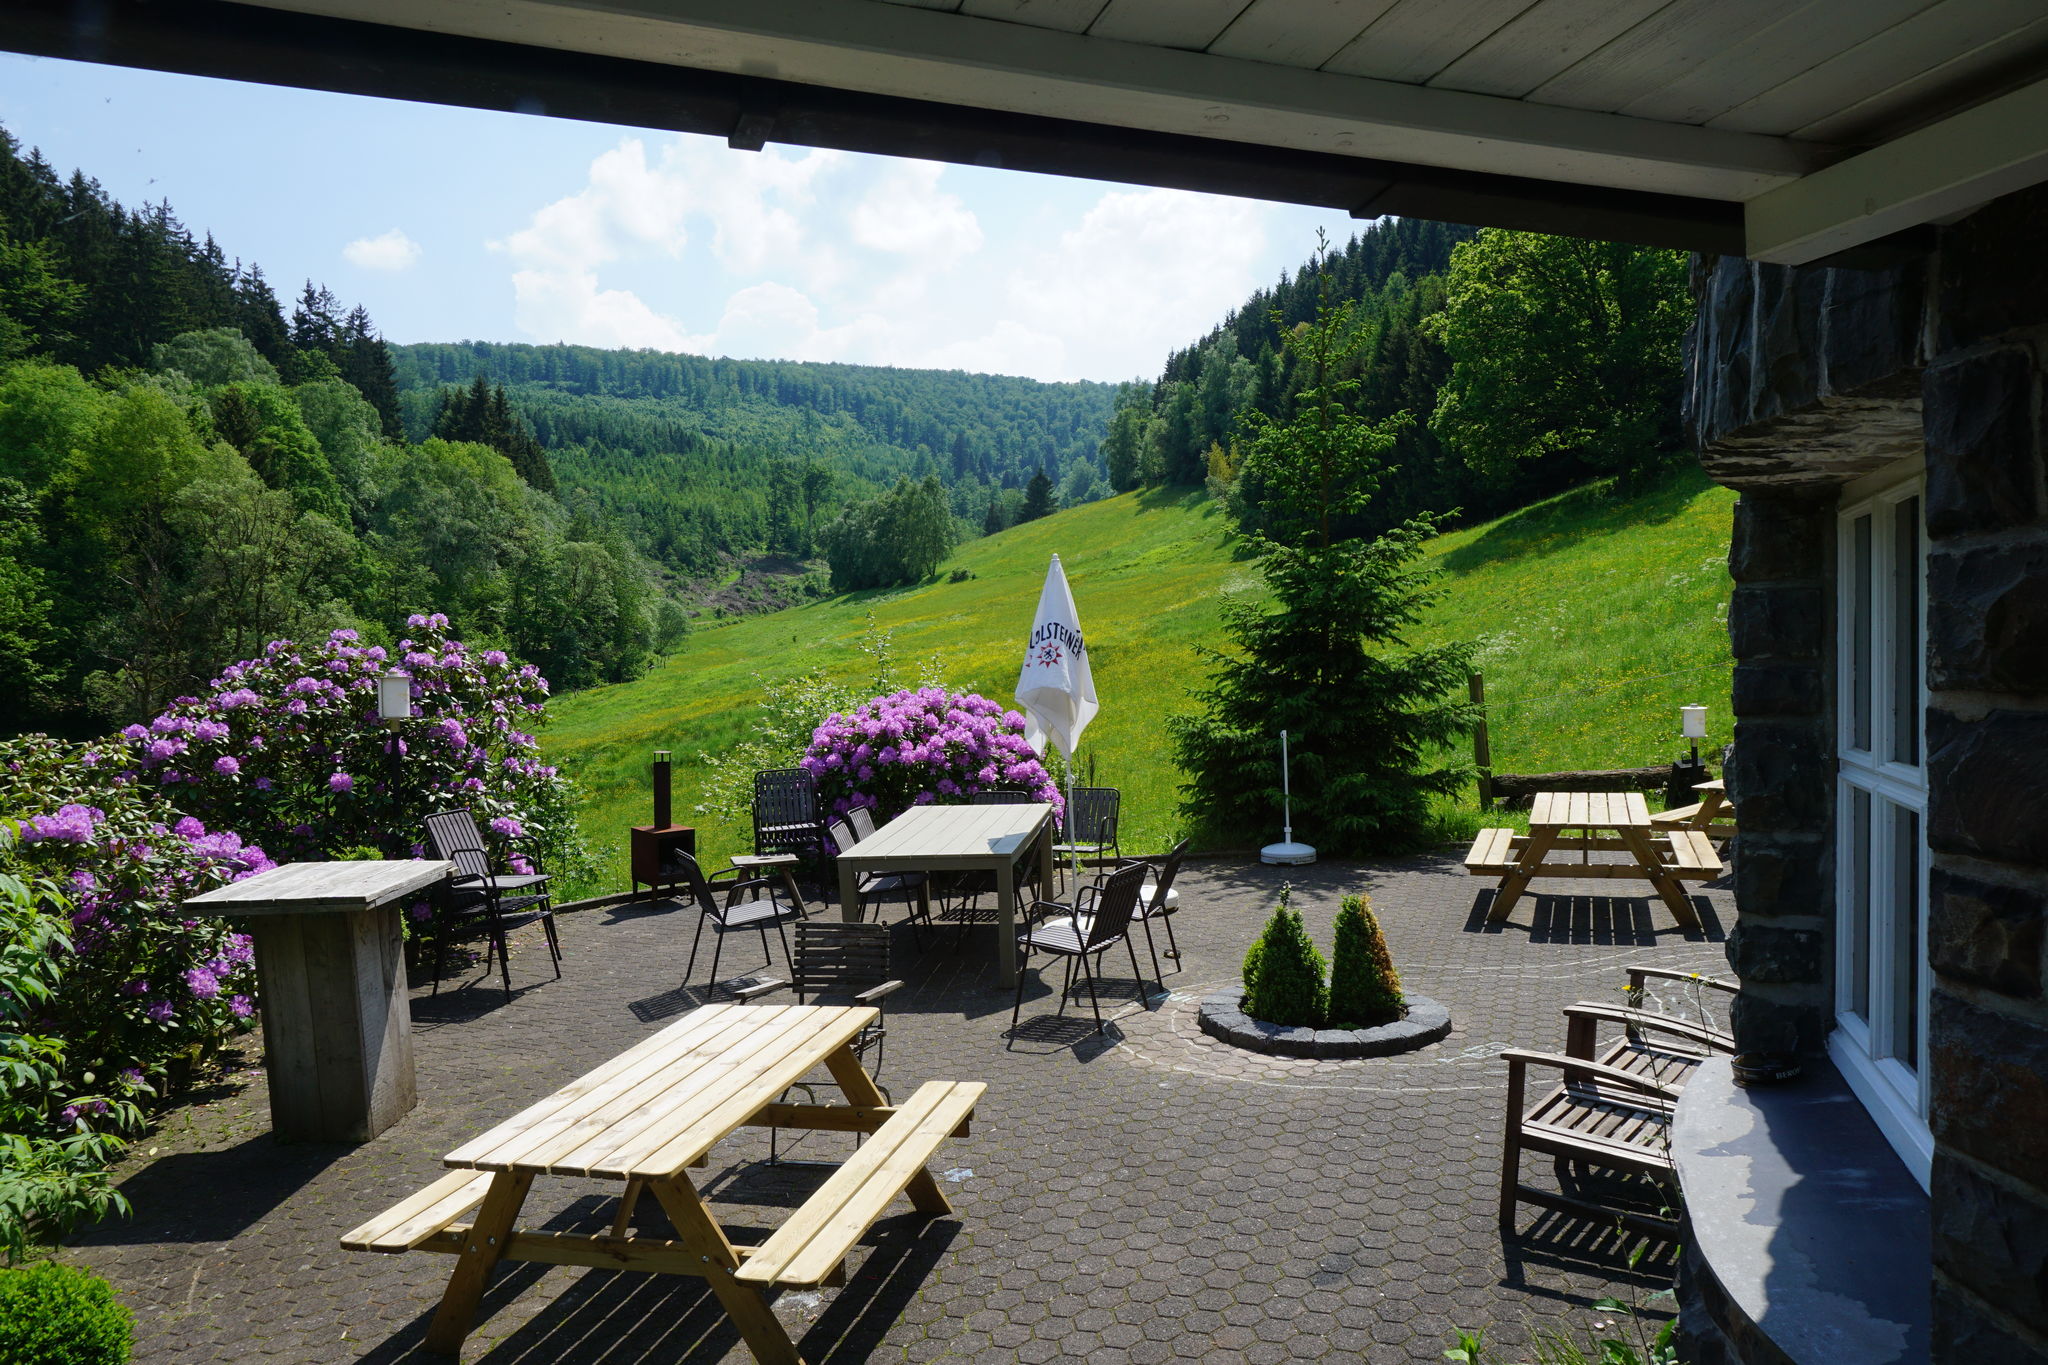 Exclusive group house in Winterberg with common room, bar and large kitchen